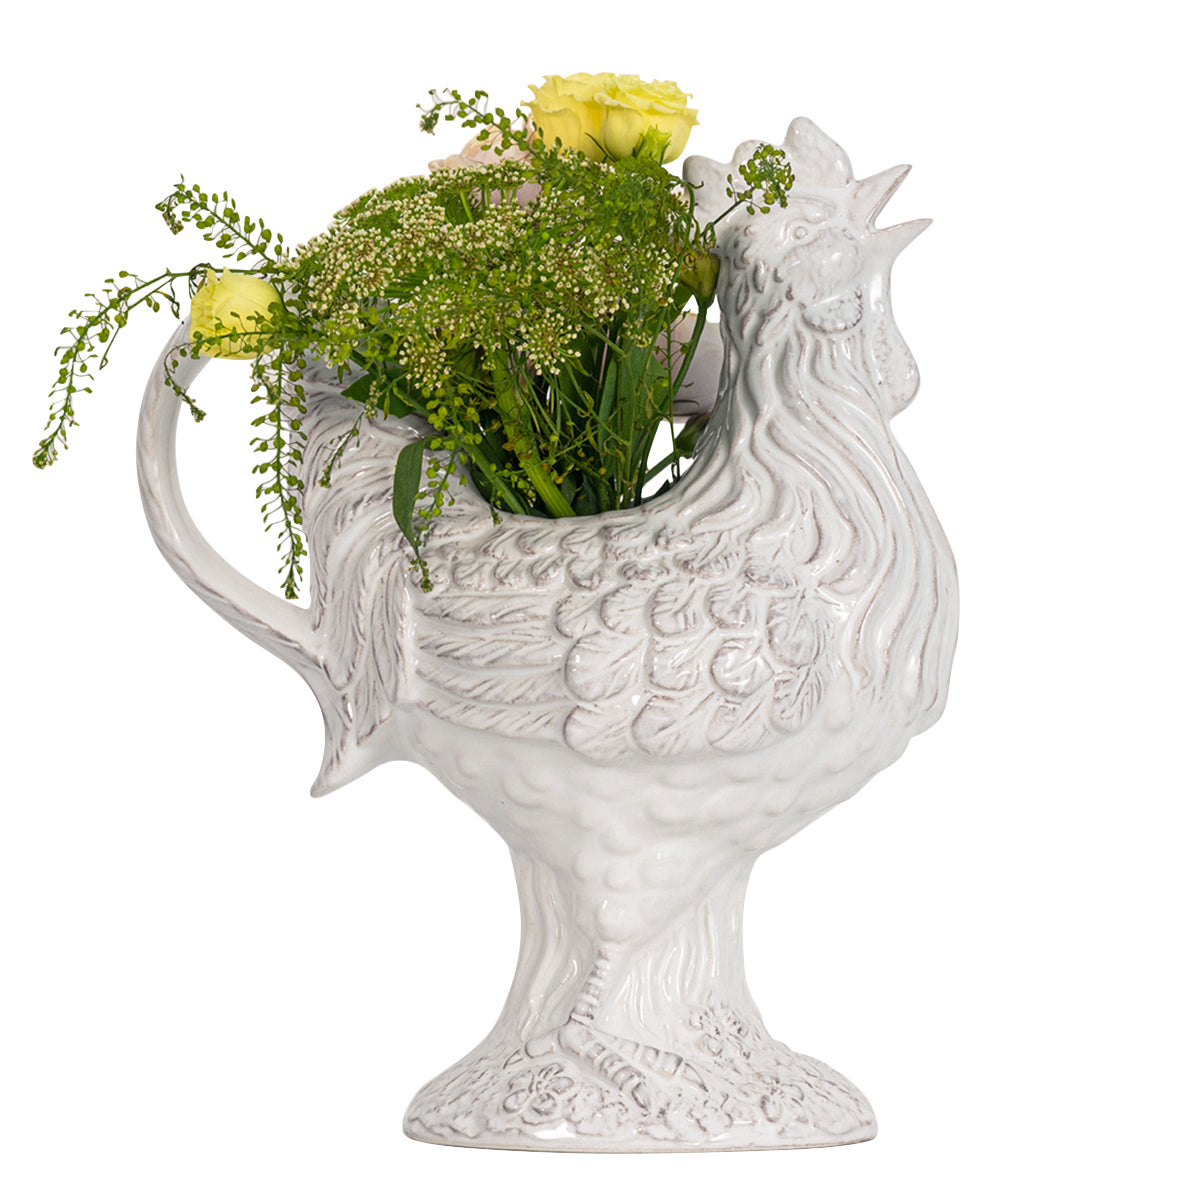 Clever Creatures Rousseau Rooster Pitcher